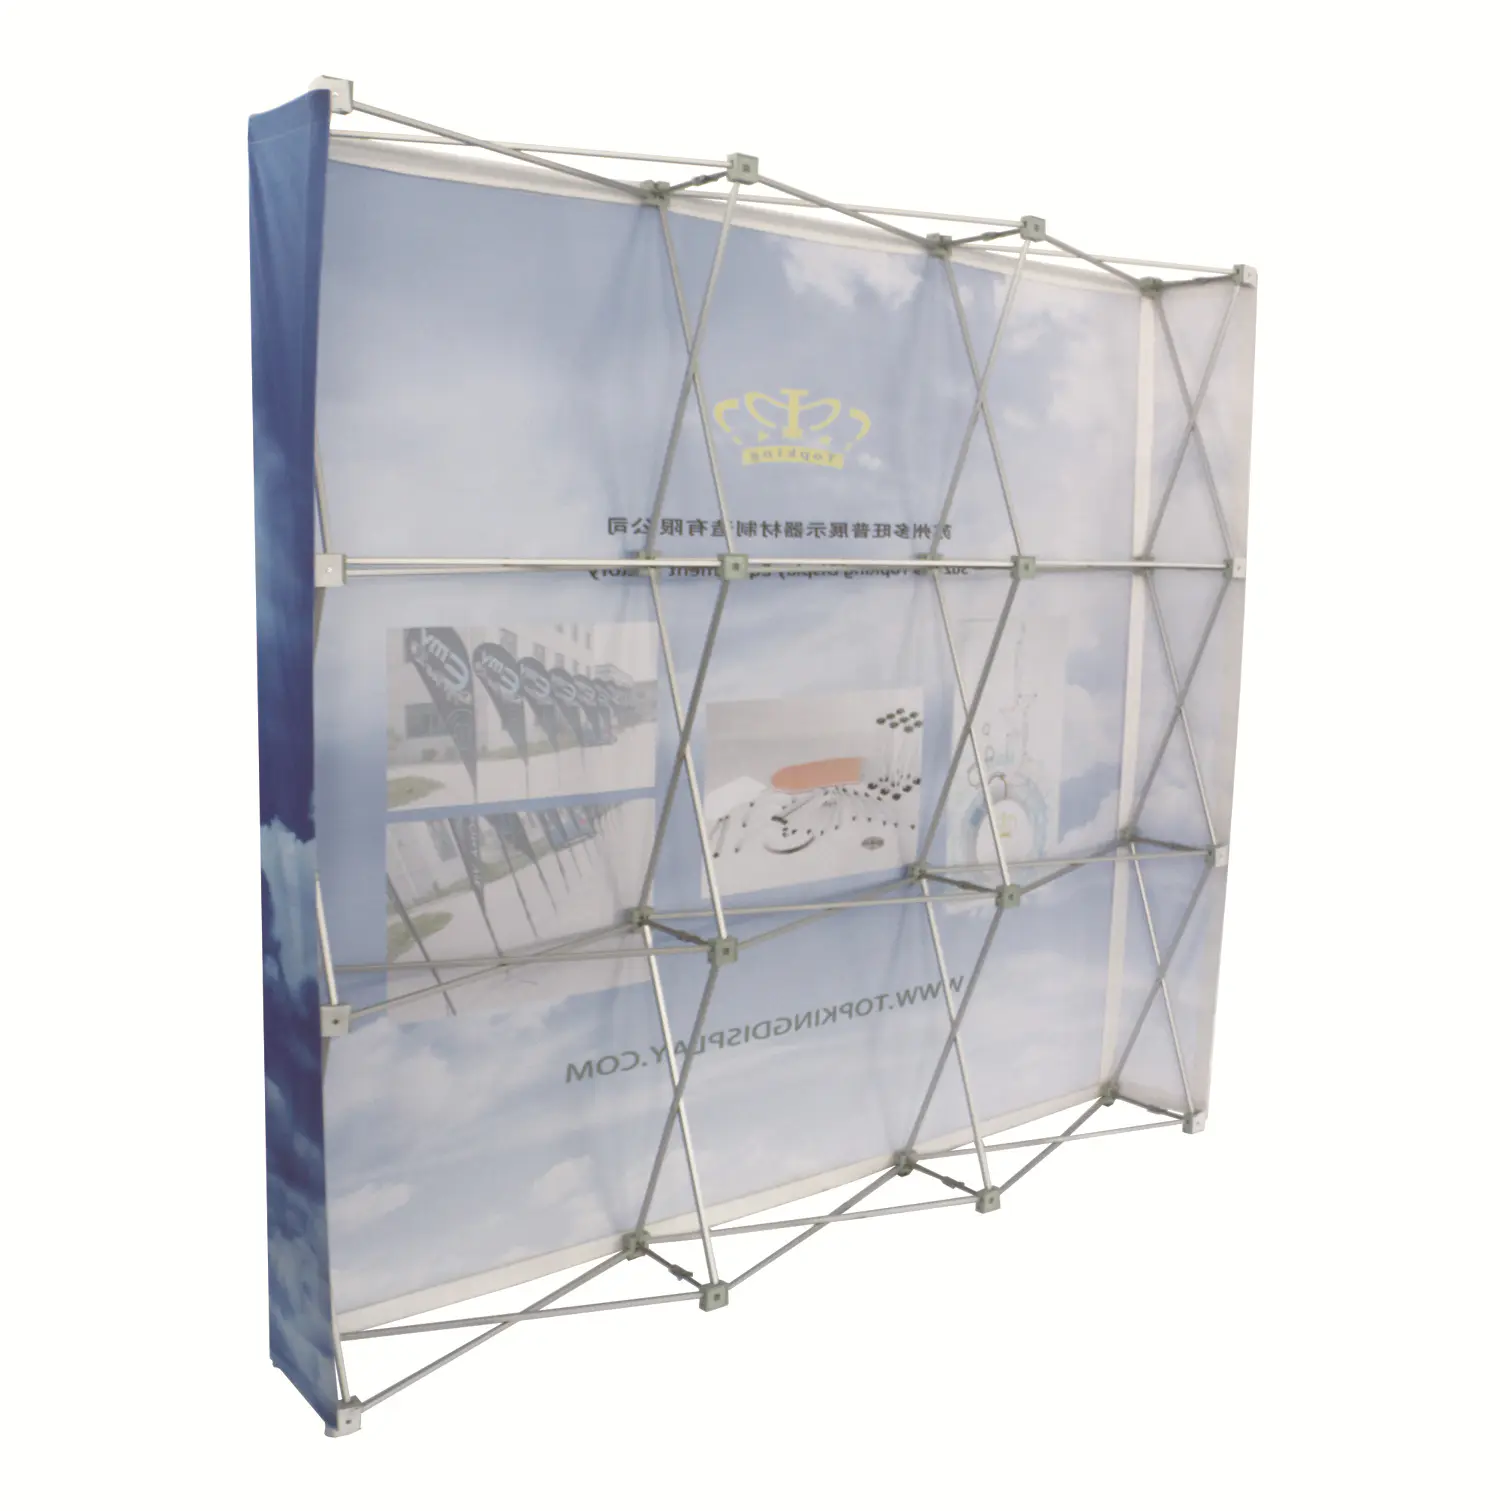 Portable pop up banner display frame pop up tension fabric backdrop stand banner